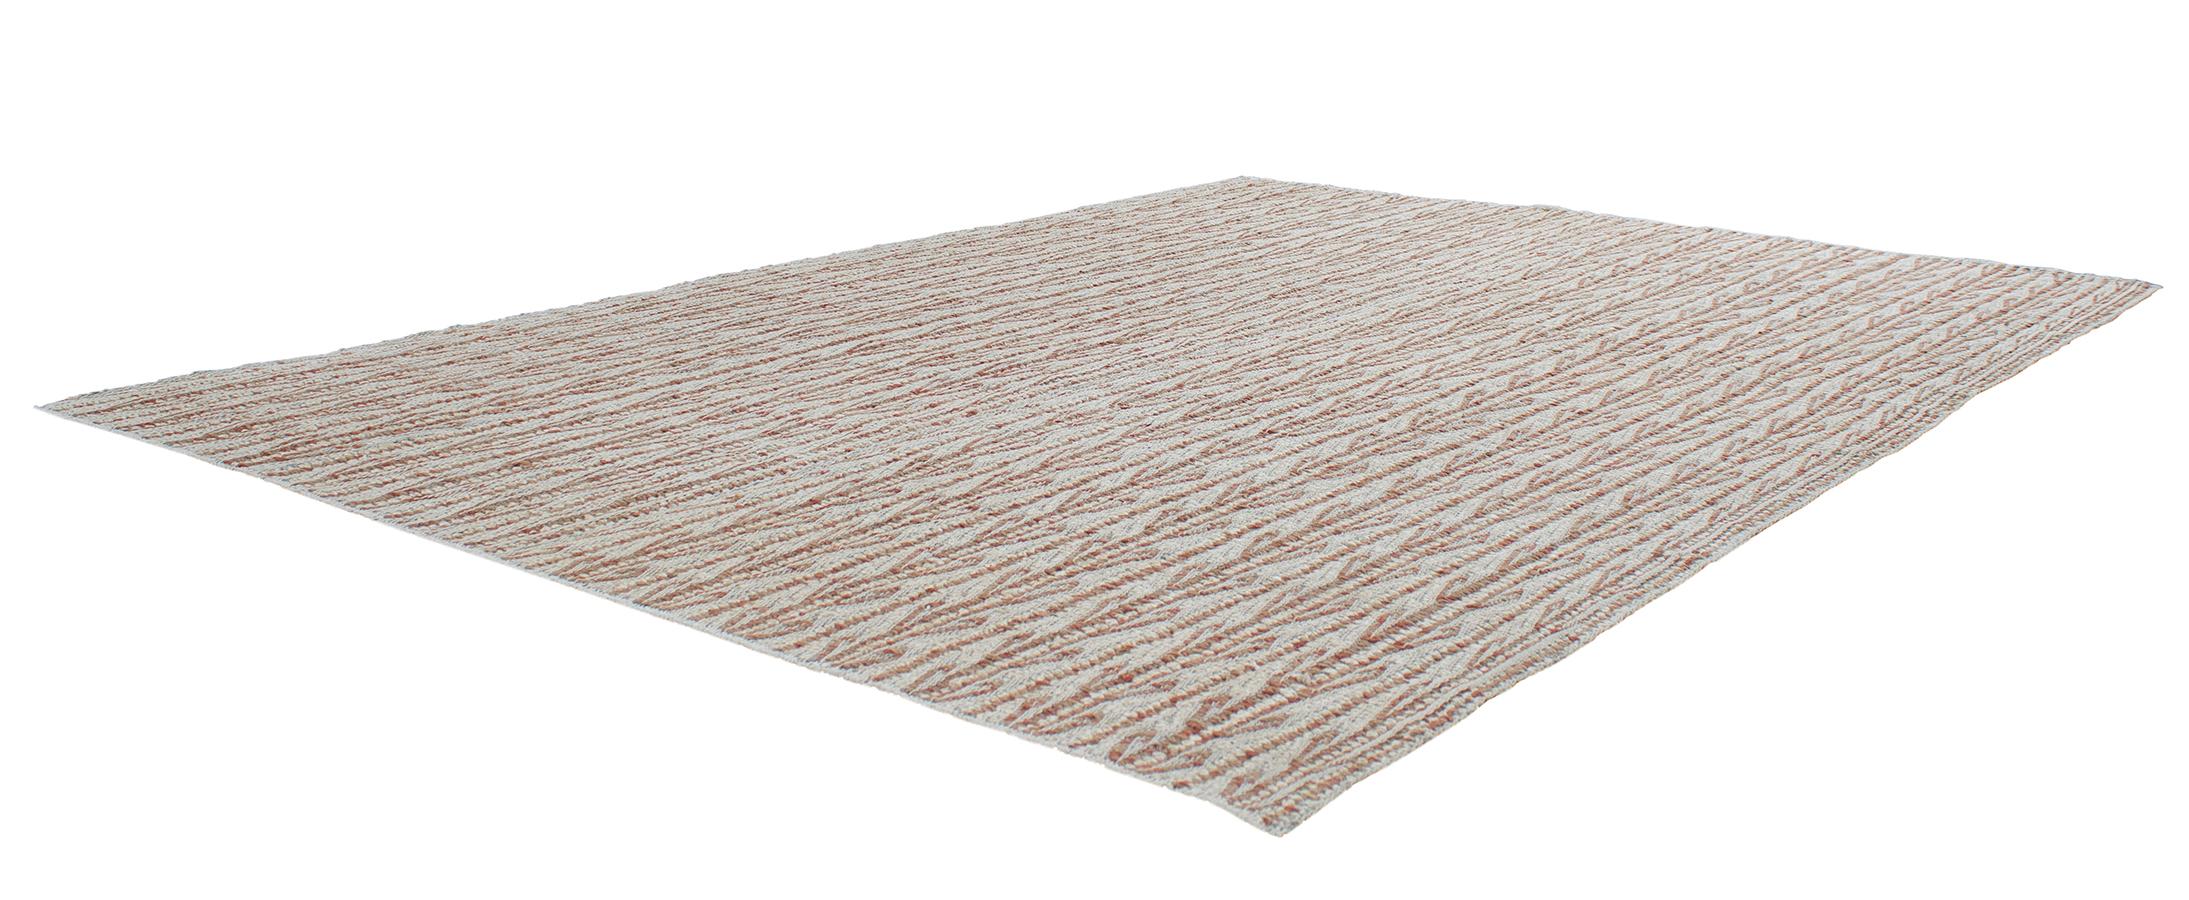 This Ricci flat-weave rug is made with handspun wool and cotton, and natural dyes. It is inspired by the antique kilims that are native to the Kurdish region in Iran. NASIRI continues their rich tradition of rug making by applying the same